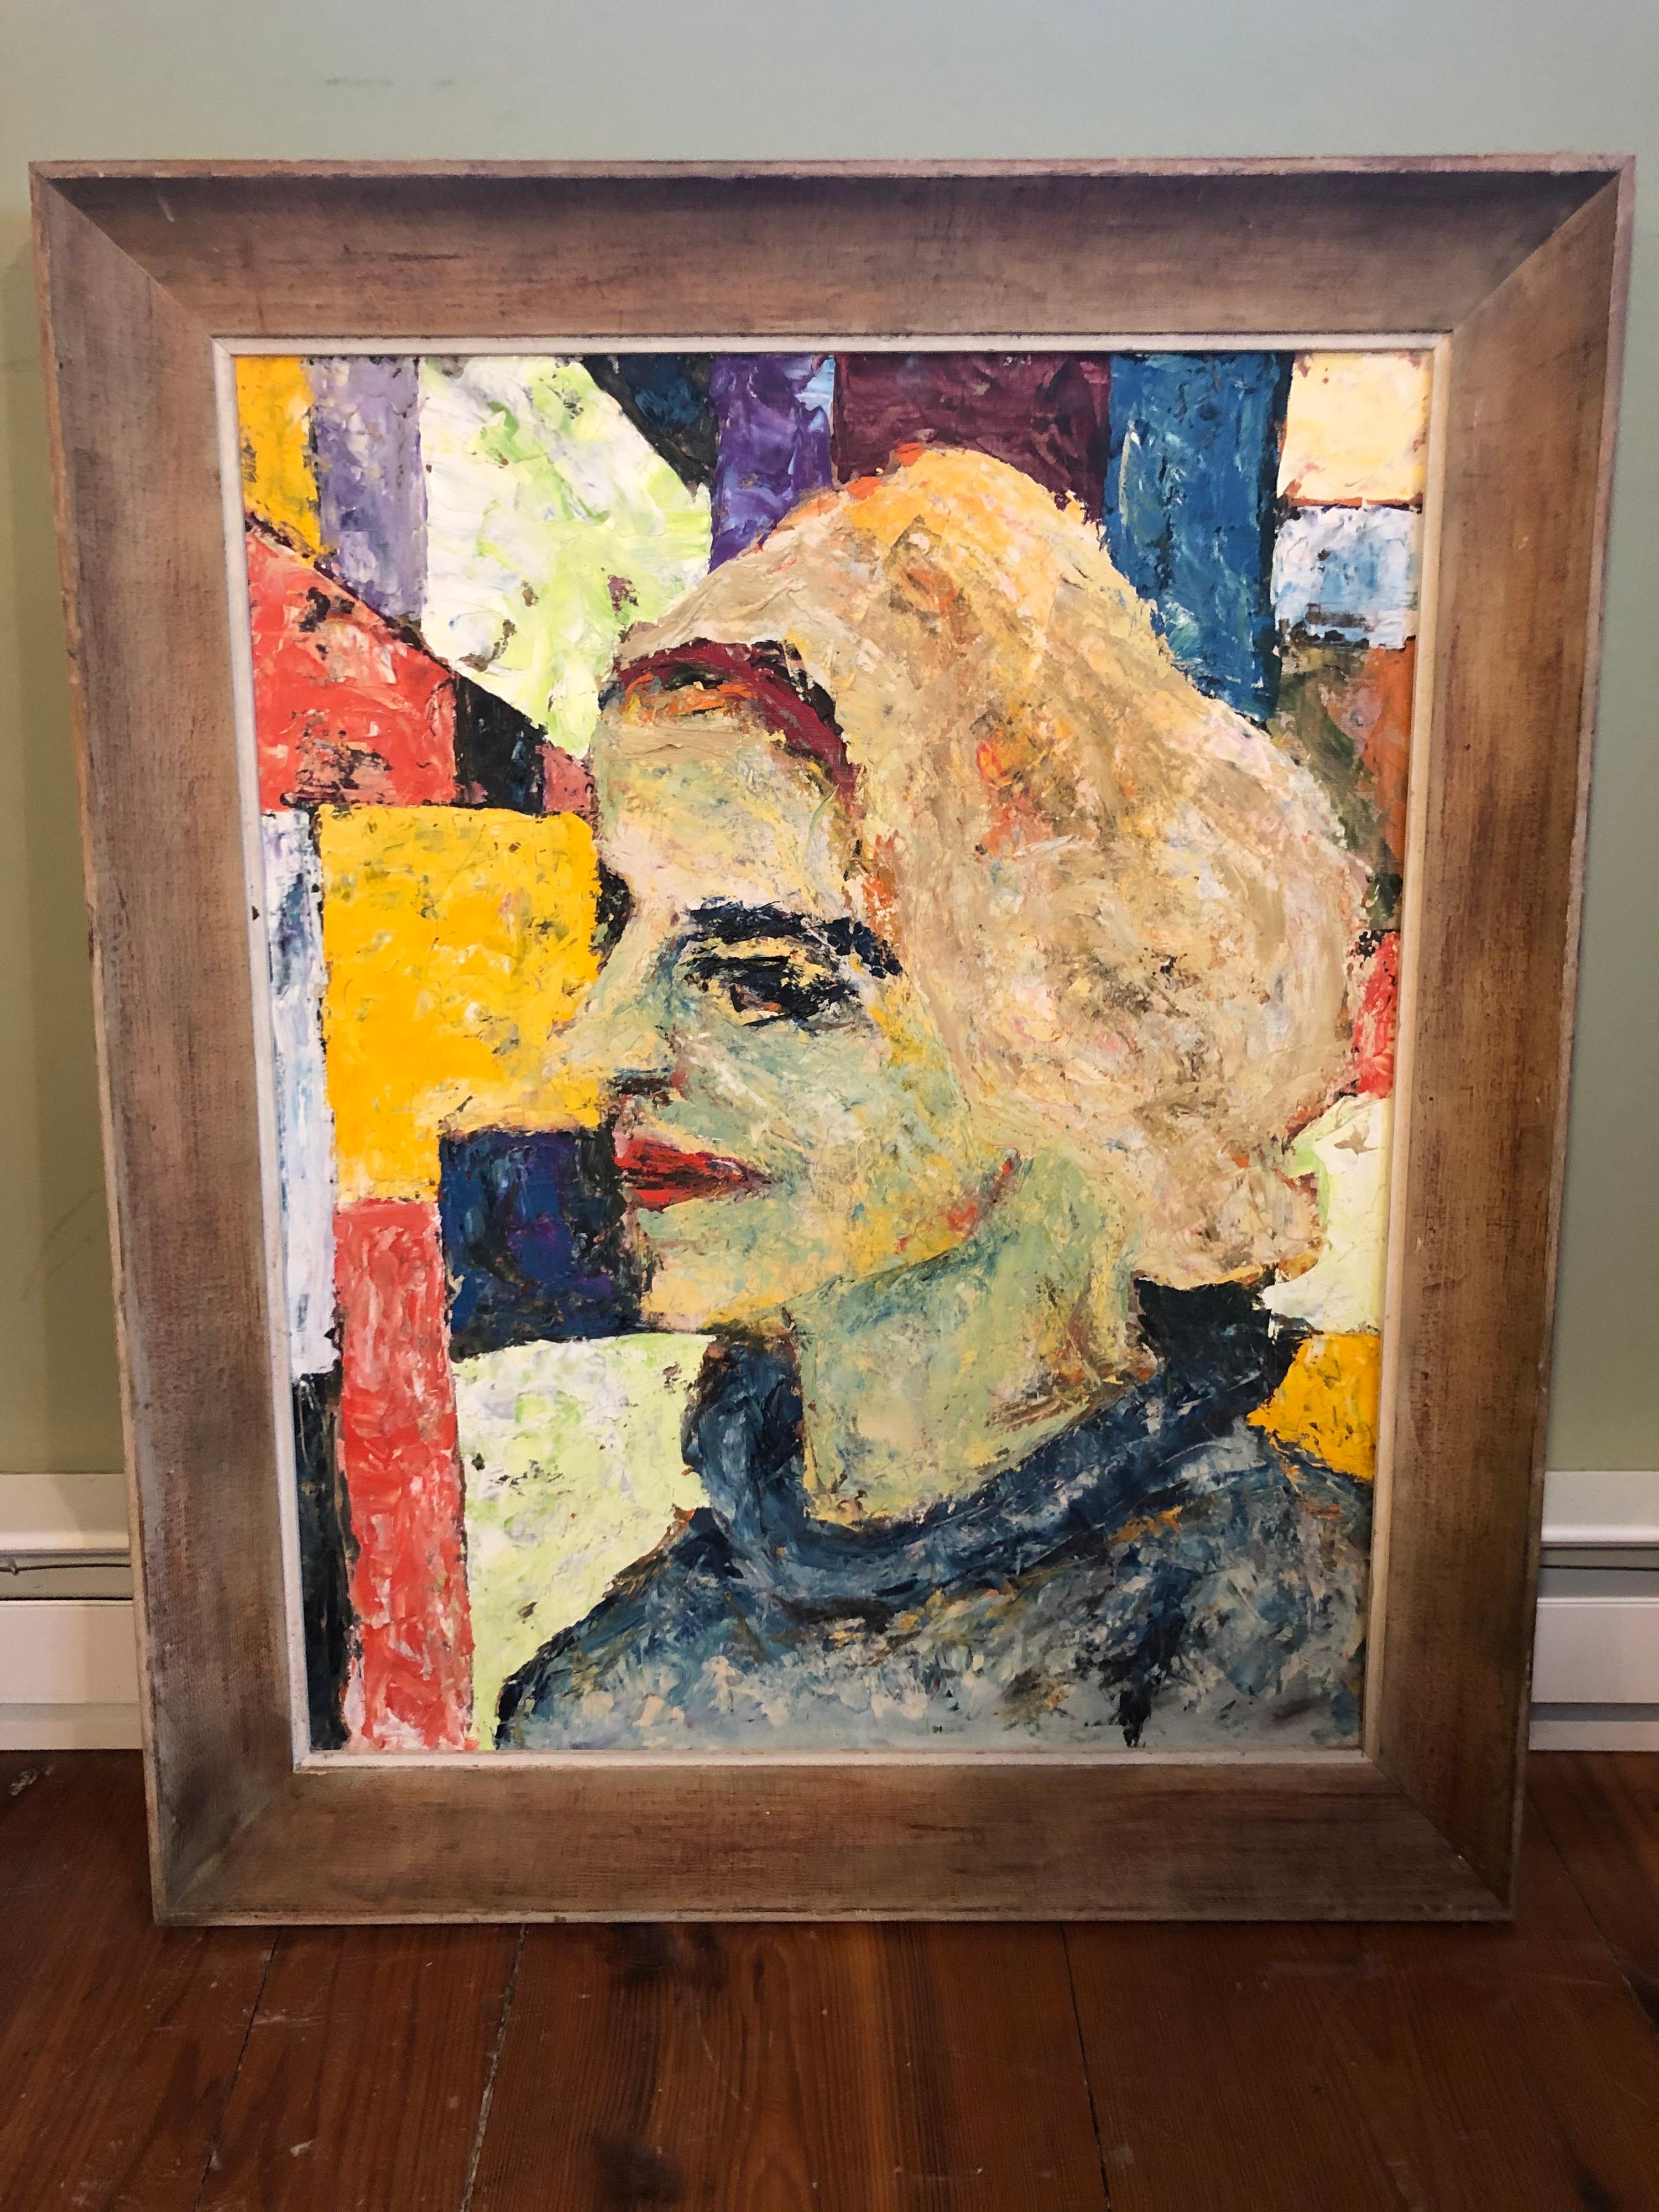 Andy Warhol Style Portrait of a Woman. Heavy impasto painting on board. She reminds us of Jackie O with a headband but with white hair. Impressive large composition. This can parcel ship domestically for $69.